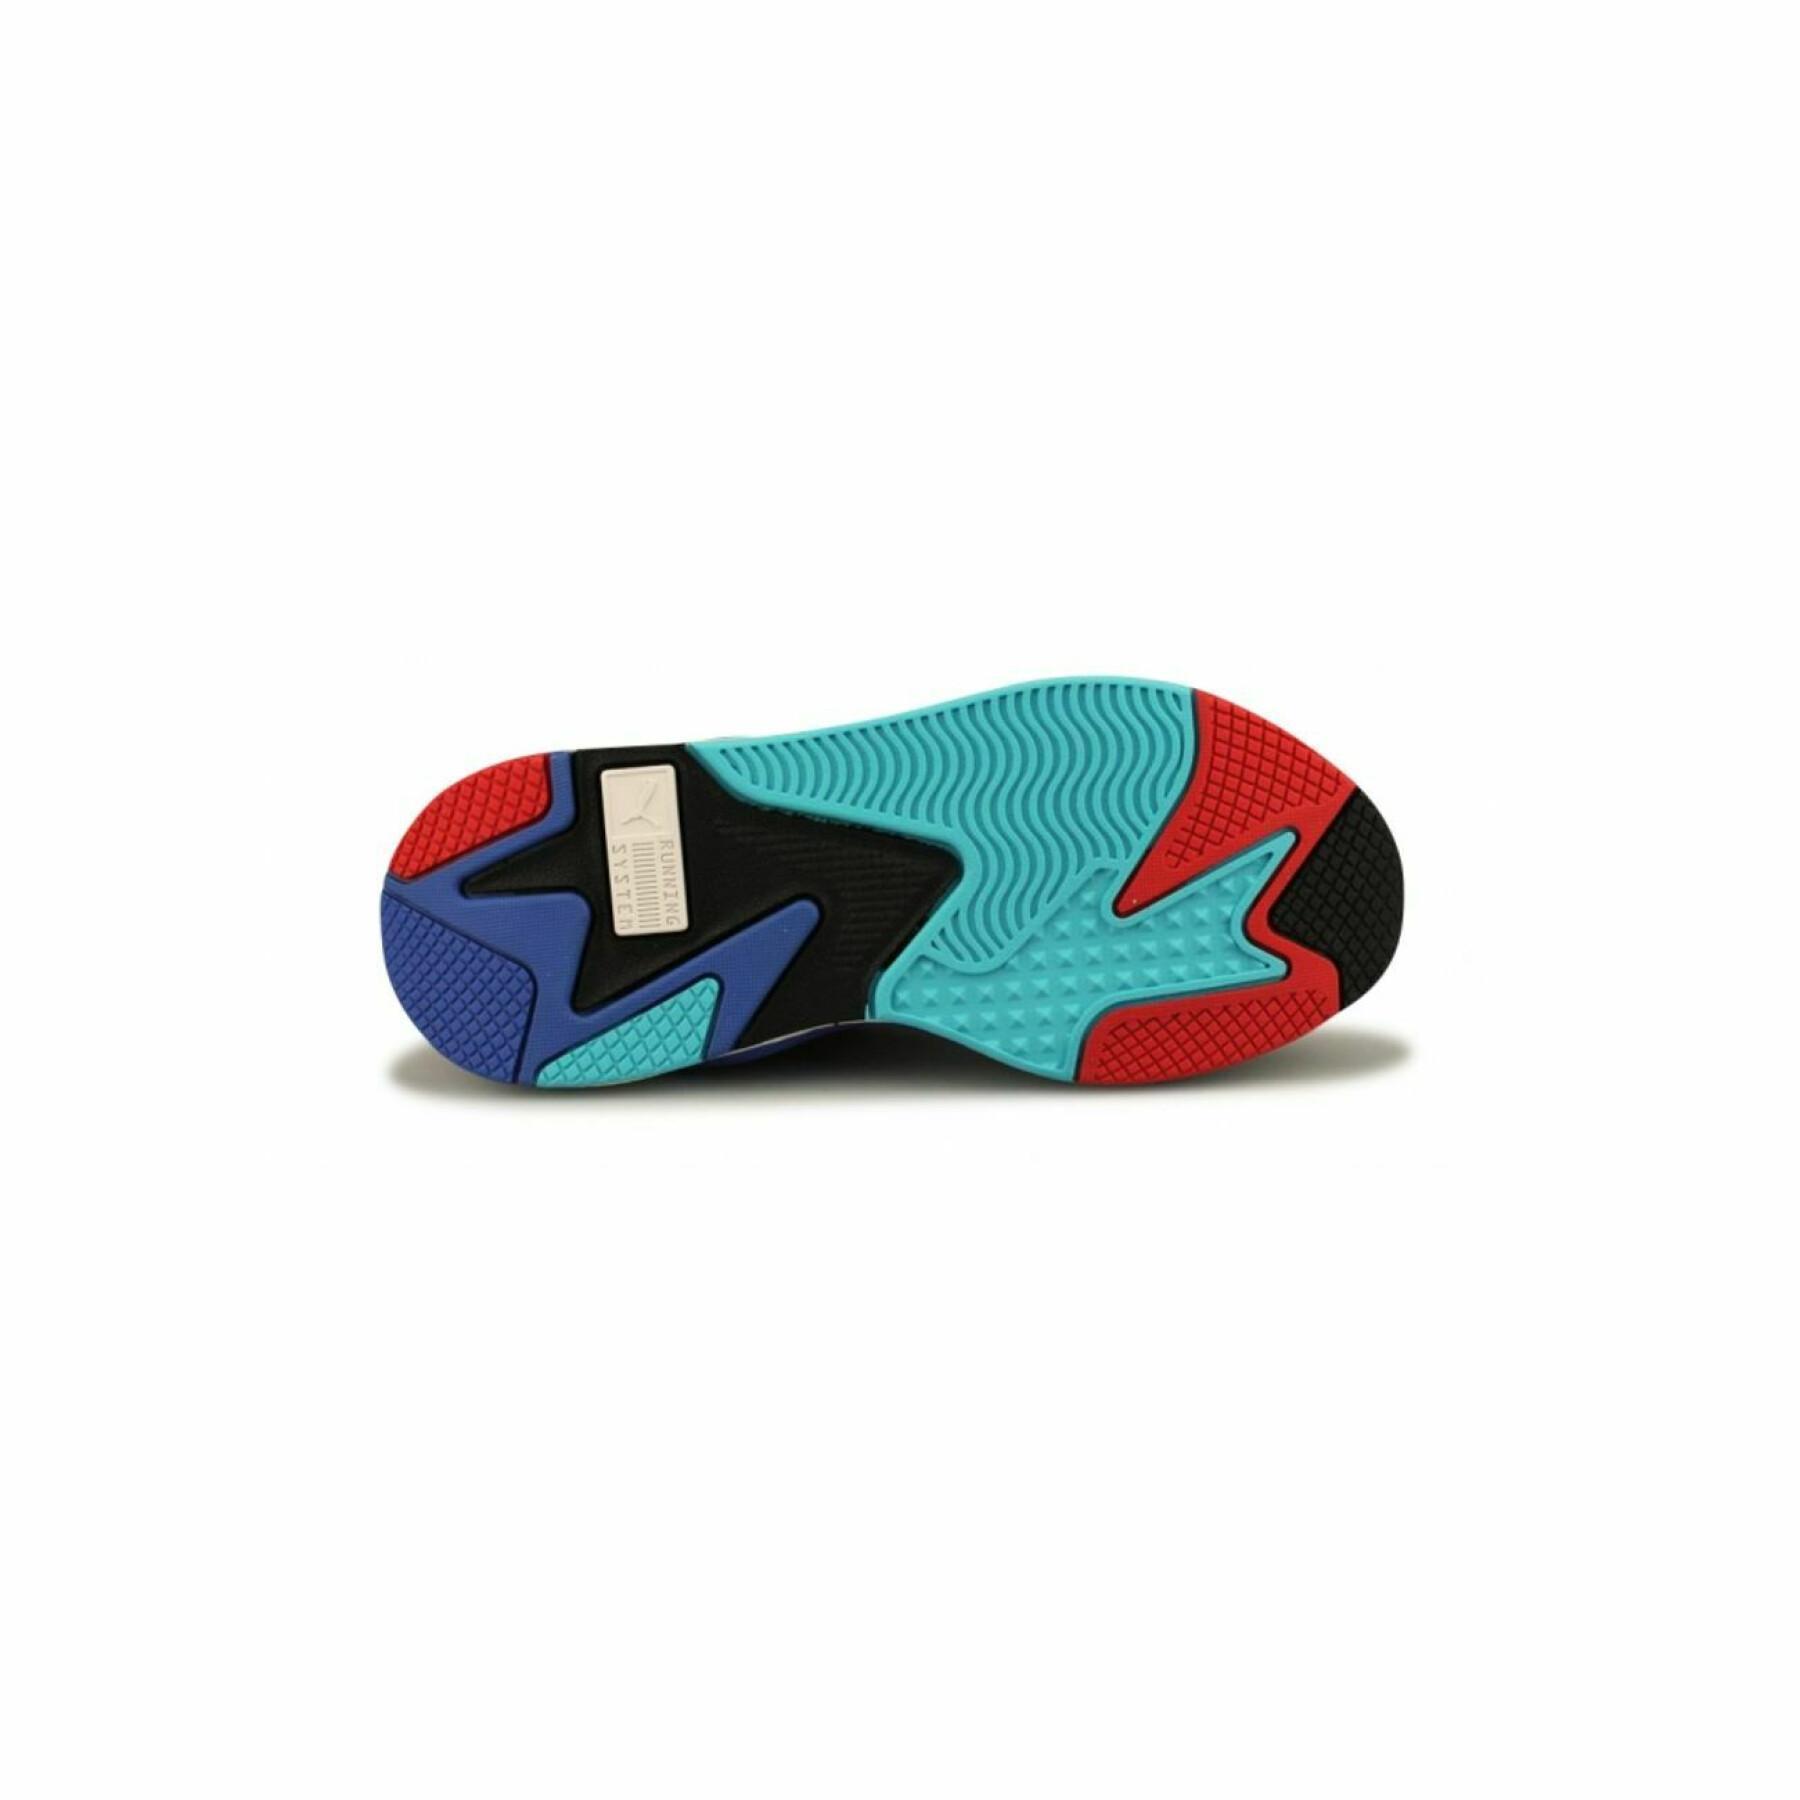 Sneakers Puma RS-X³ Puzzle